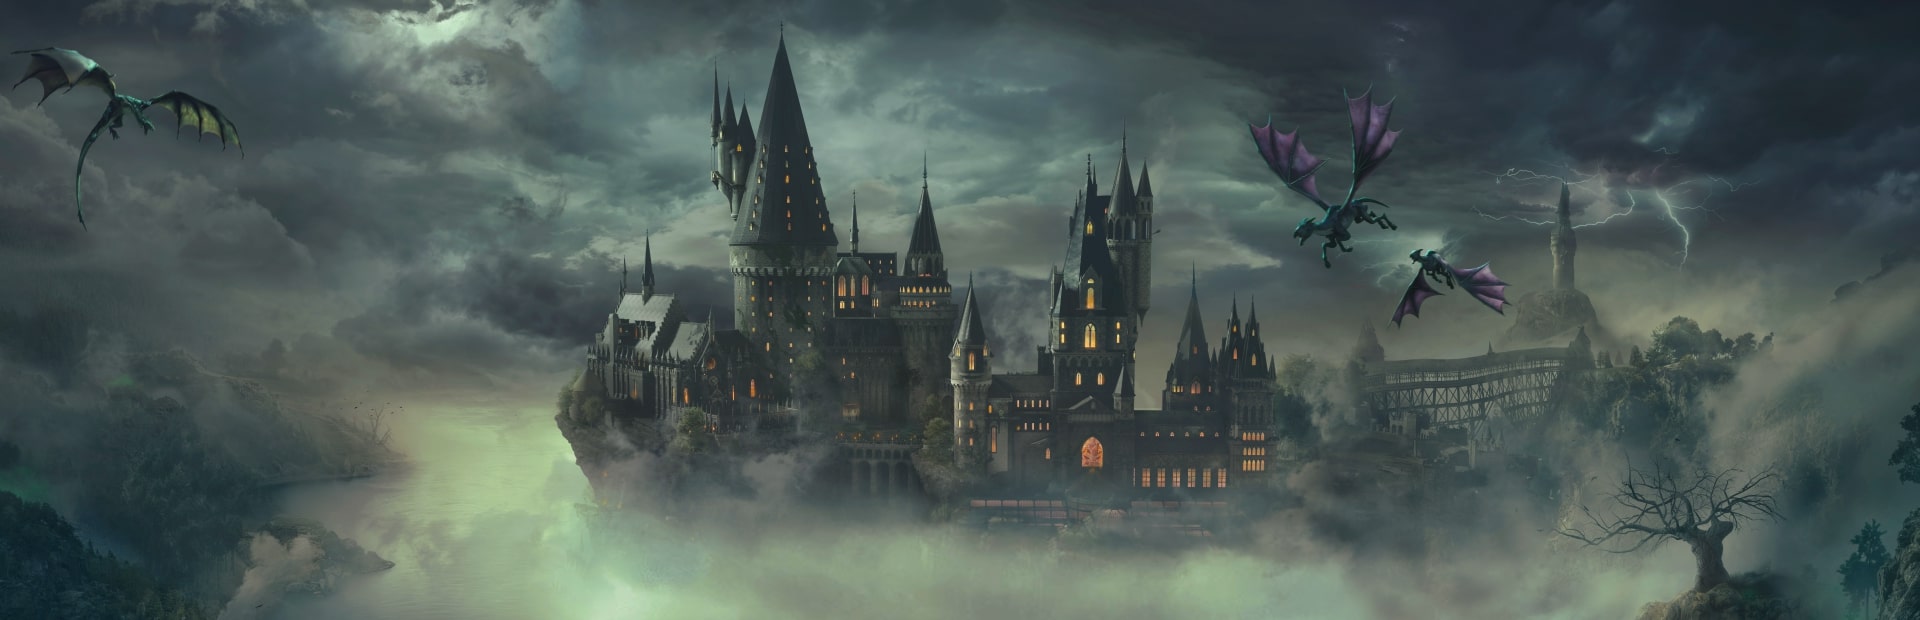 Hogwarts Legacy | Now Available at PJ's Games